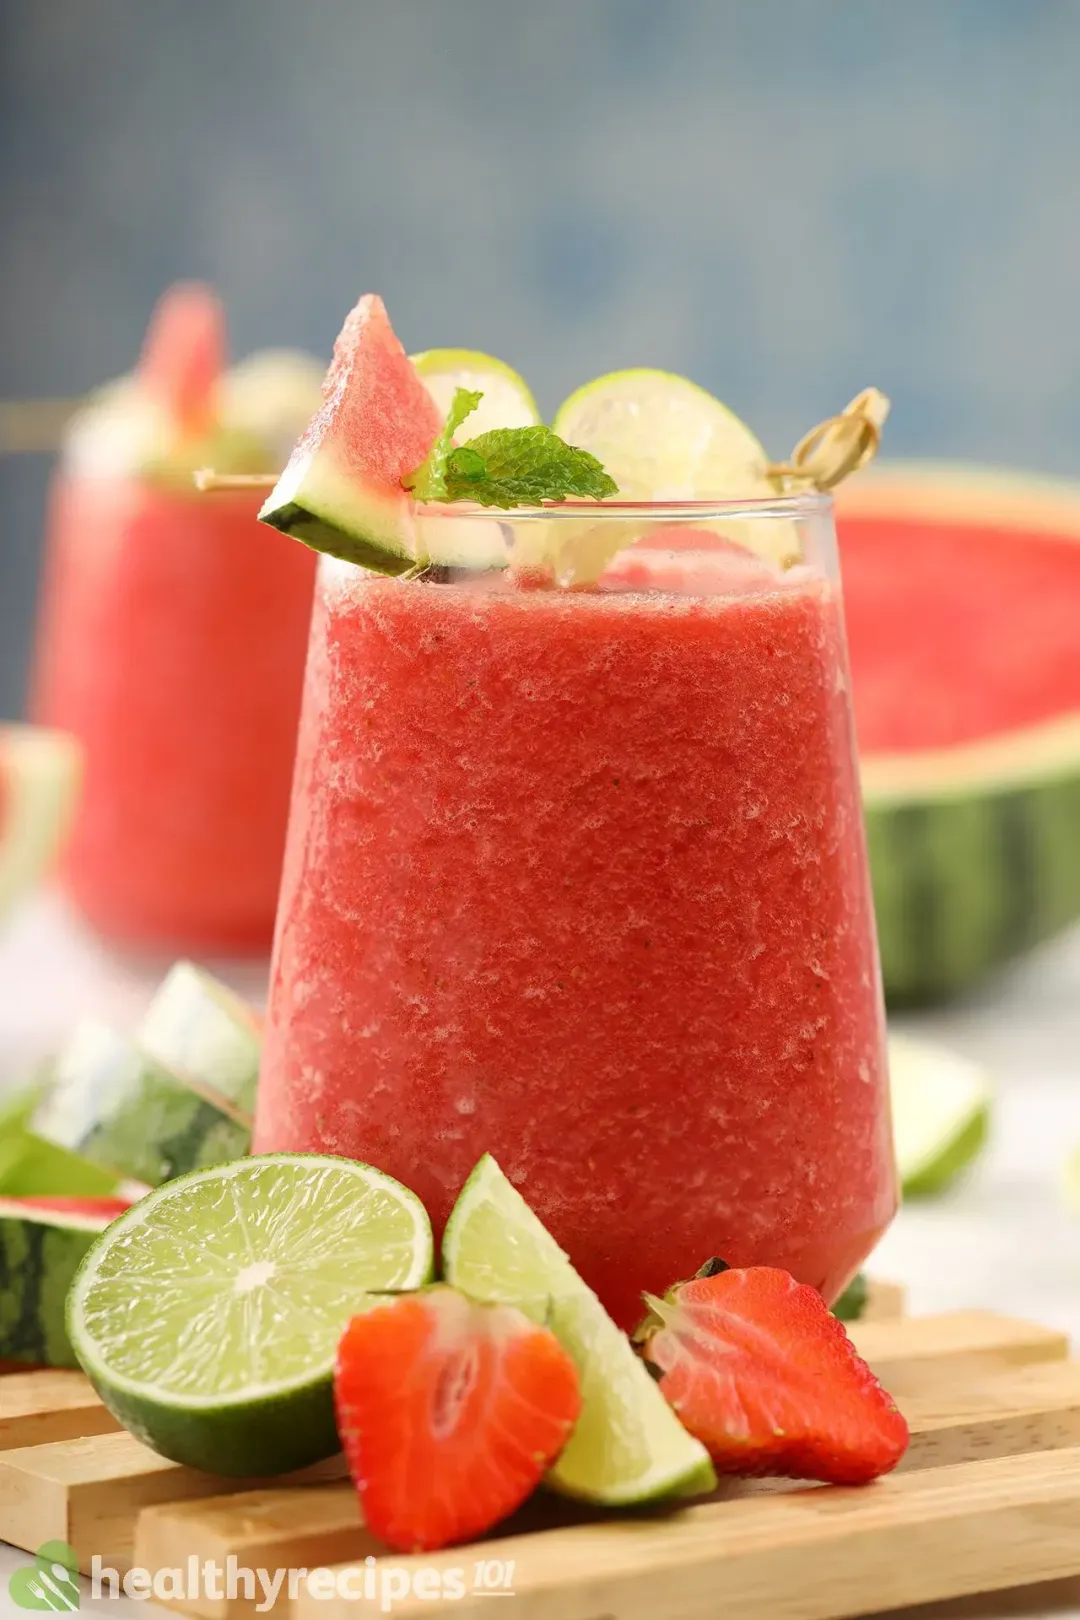 A glass of watermelon mojito smoothie, slices of watermelon, halved lime, and strawberries placed on a wooden tray